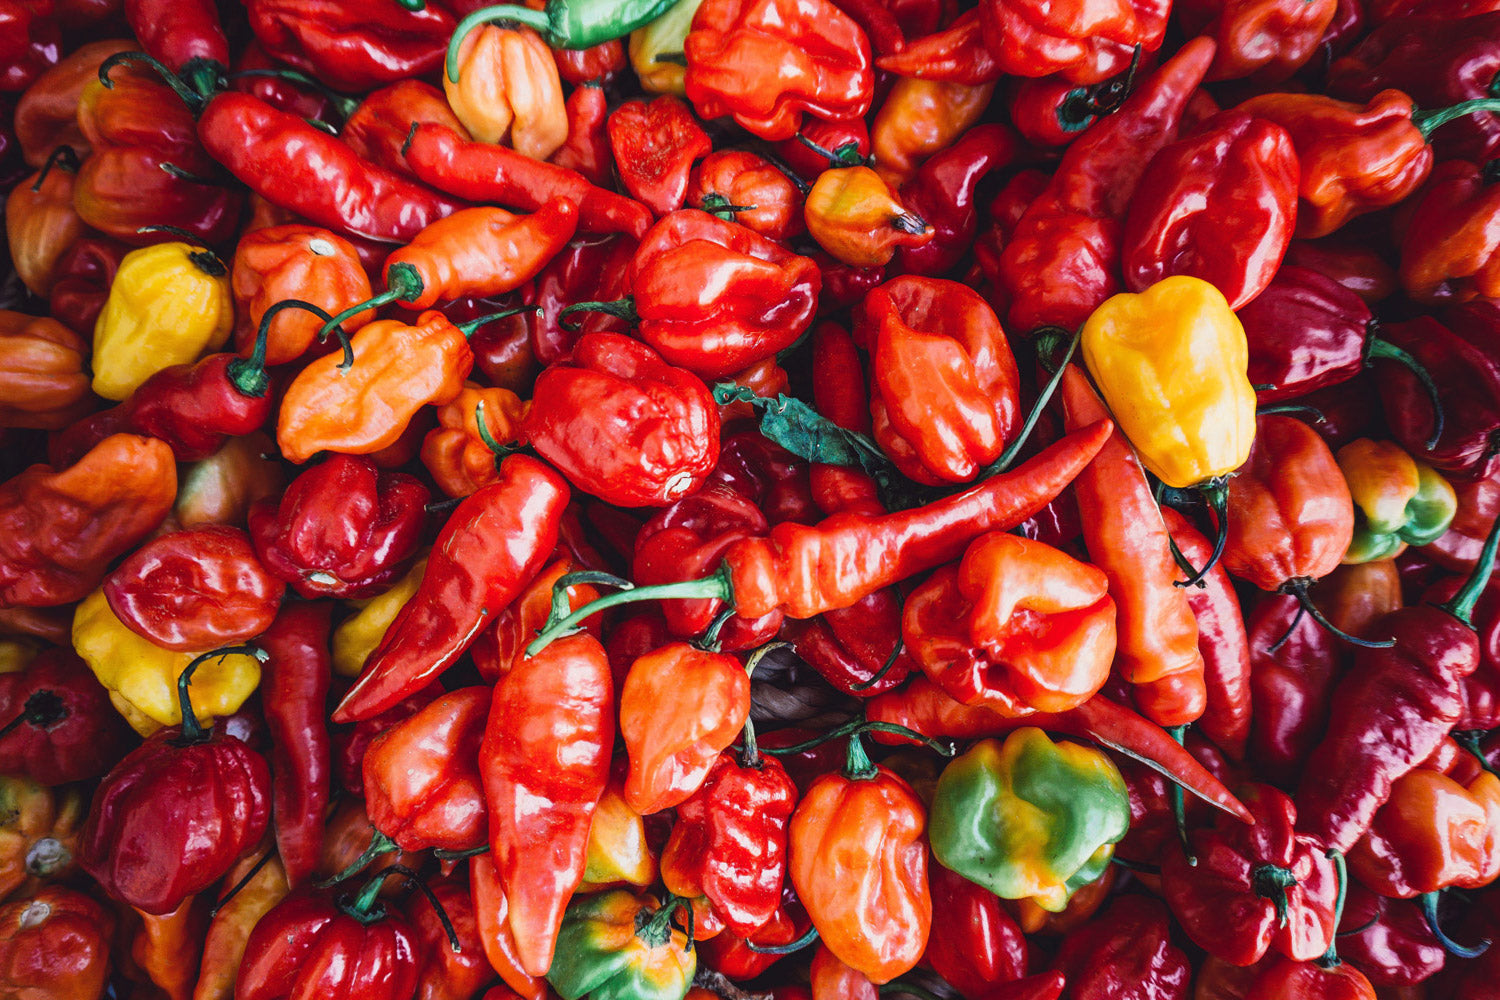 About the Scoville Scale